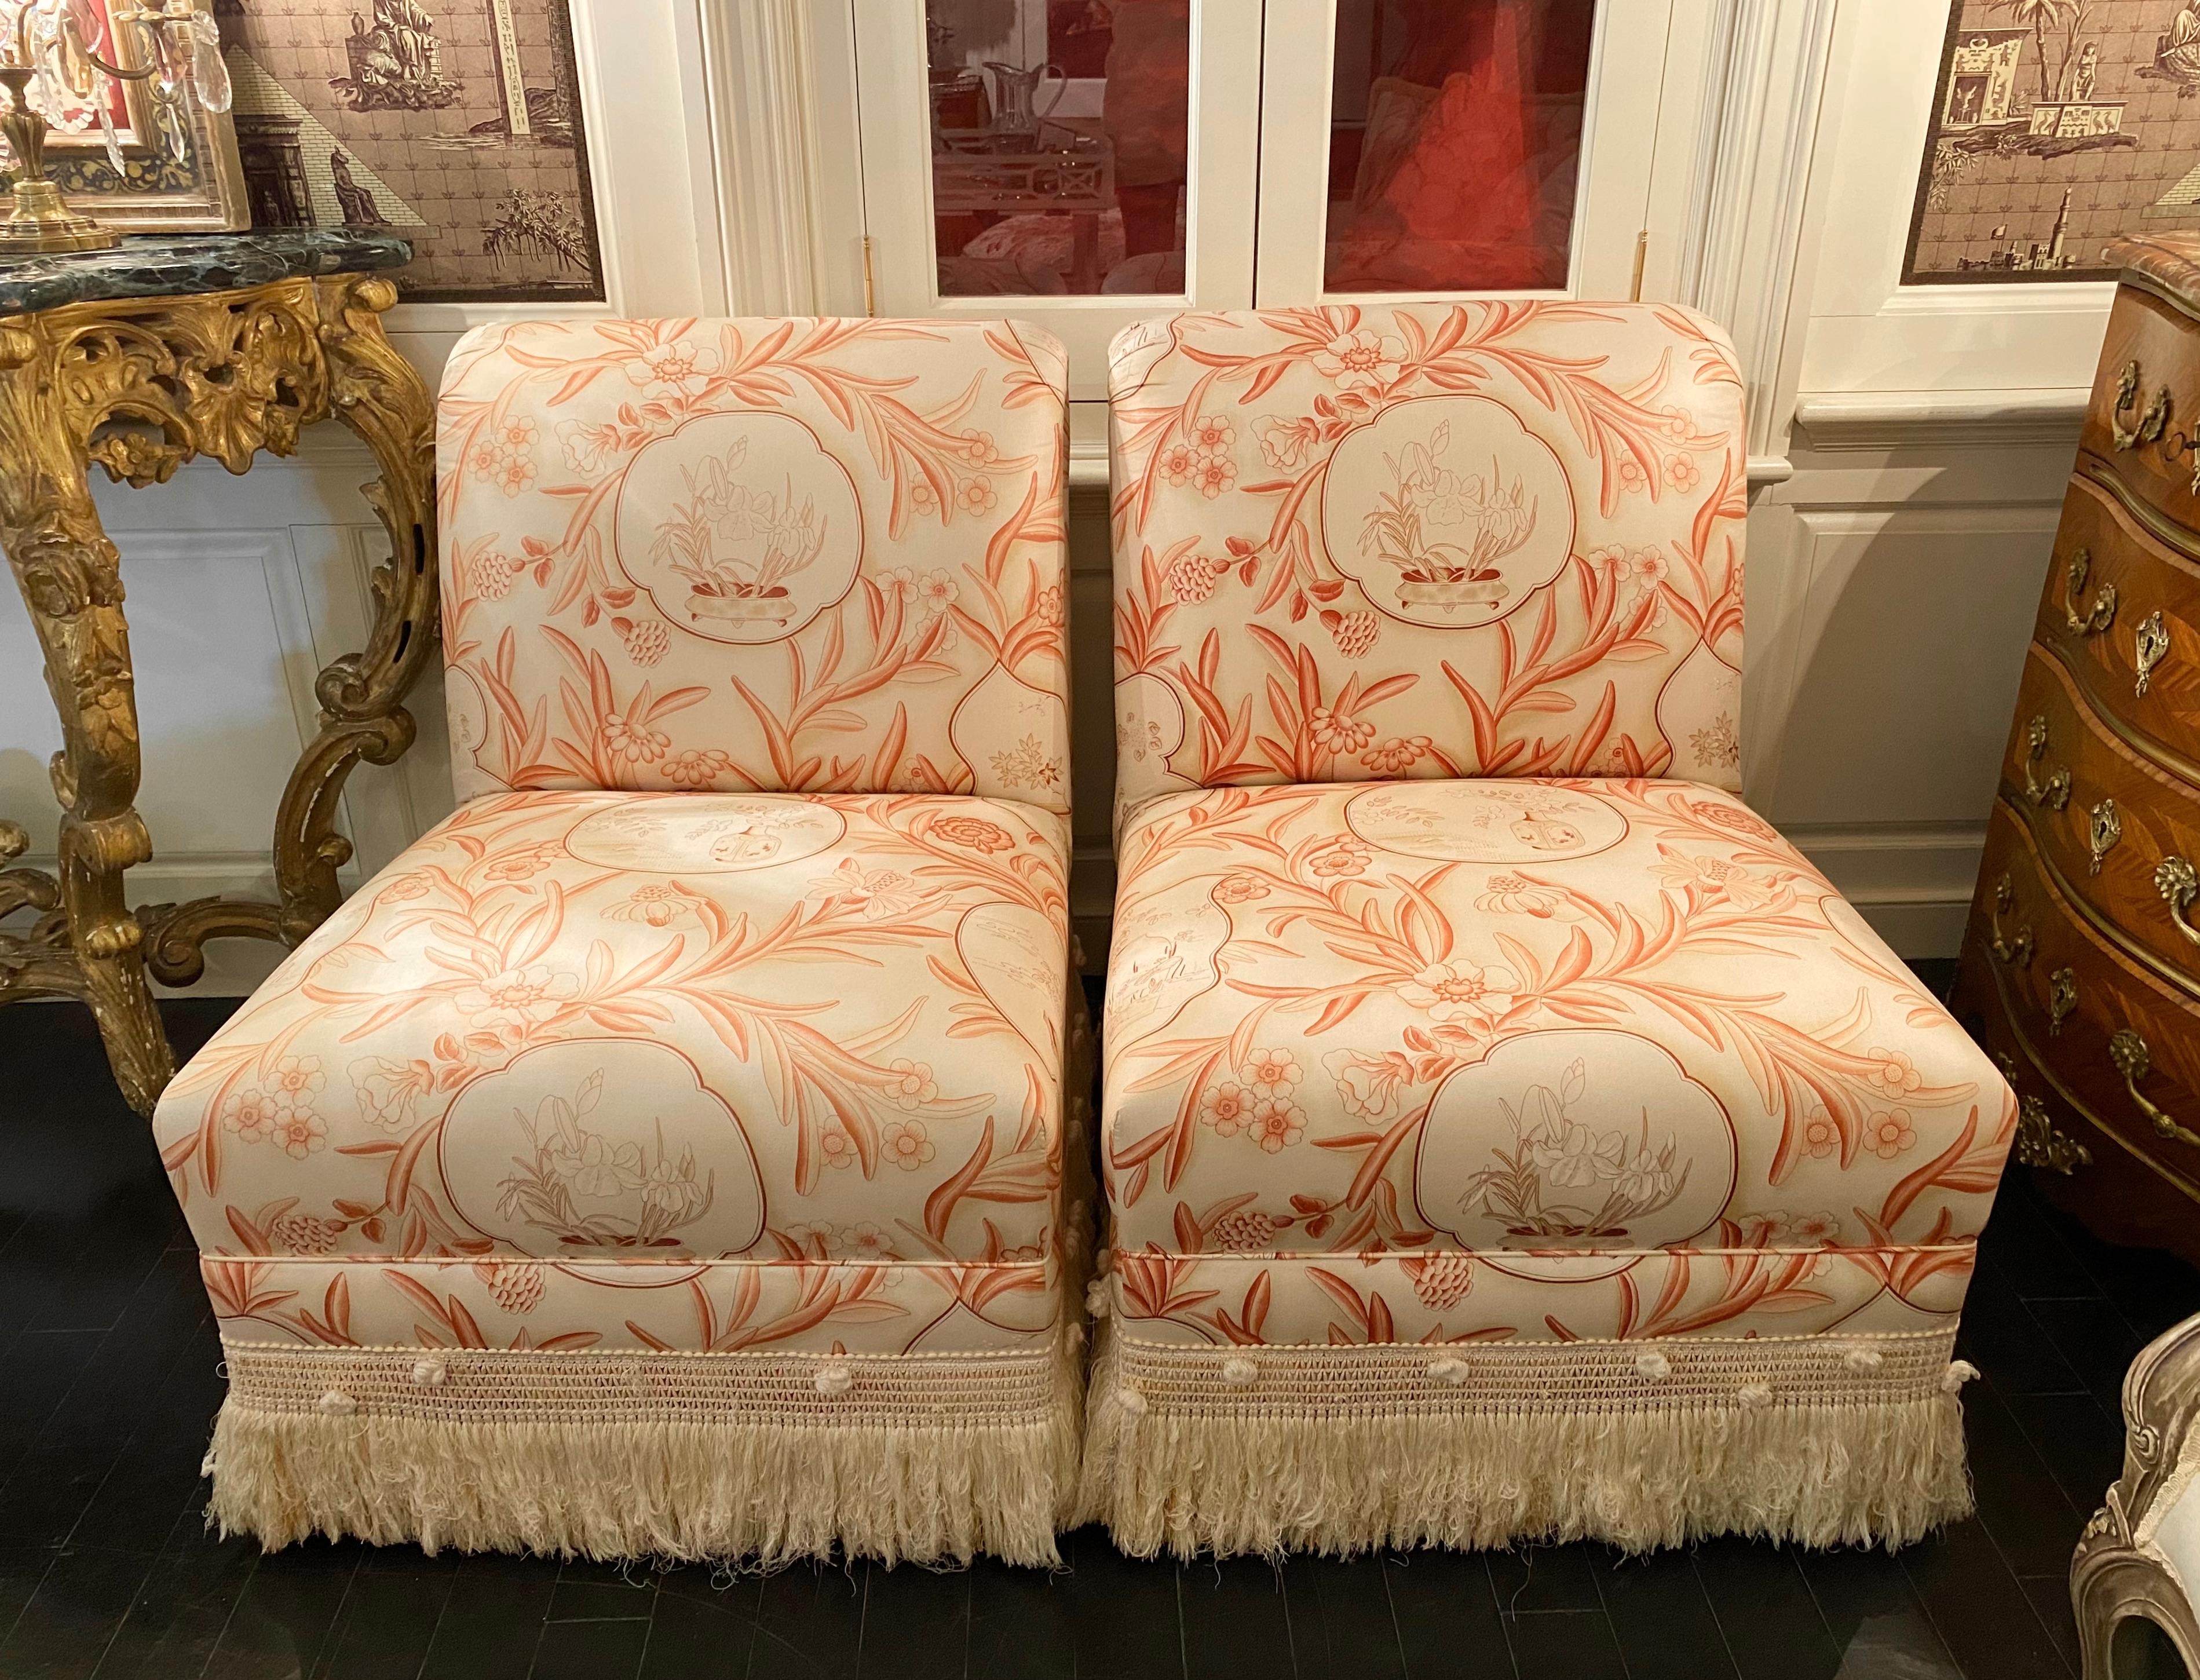 20th Century Pair of Slipper Chairs, Mid-Century Modern, Upholstered Toile Chinoiserie Motif